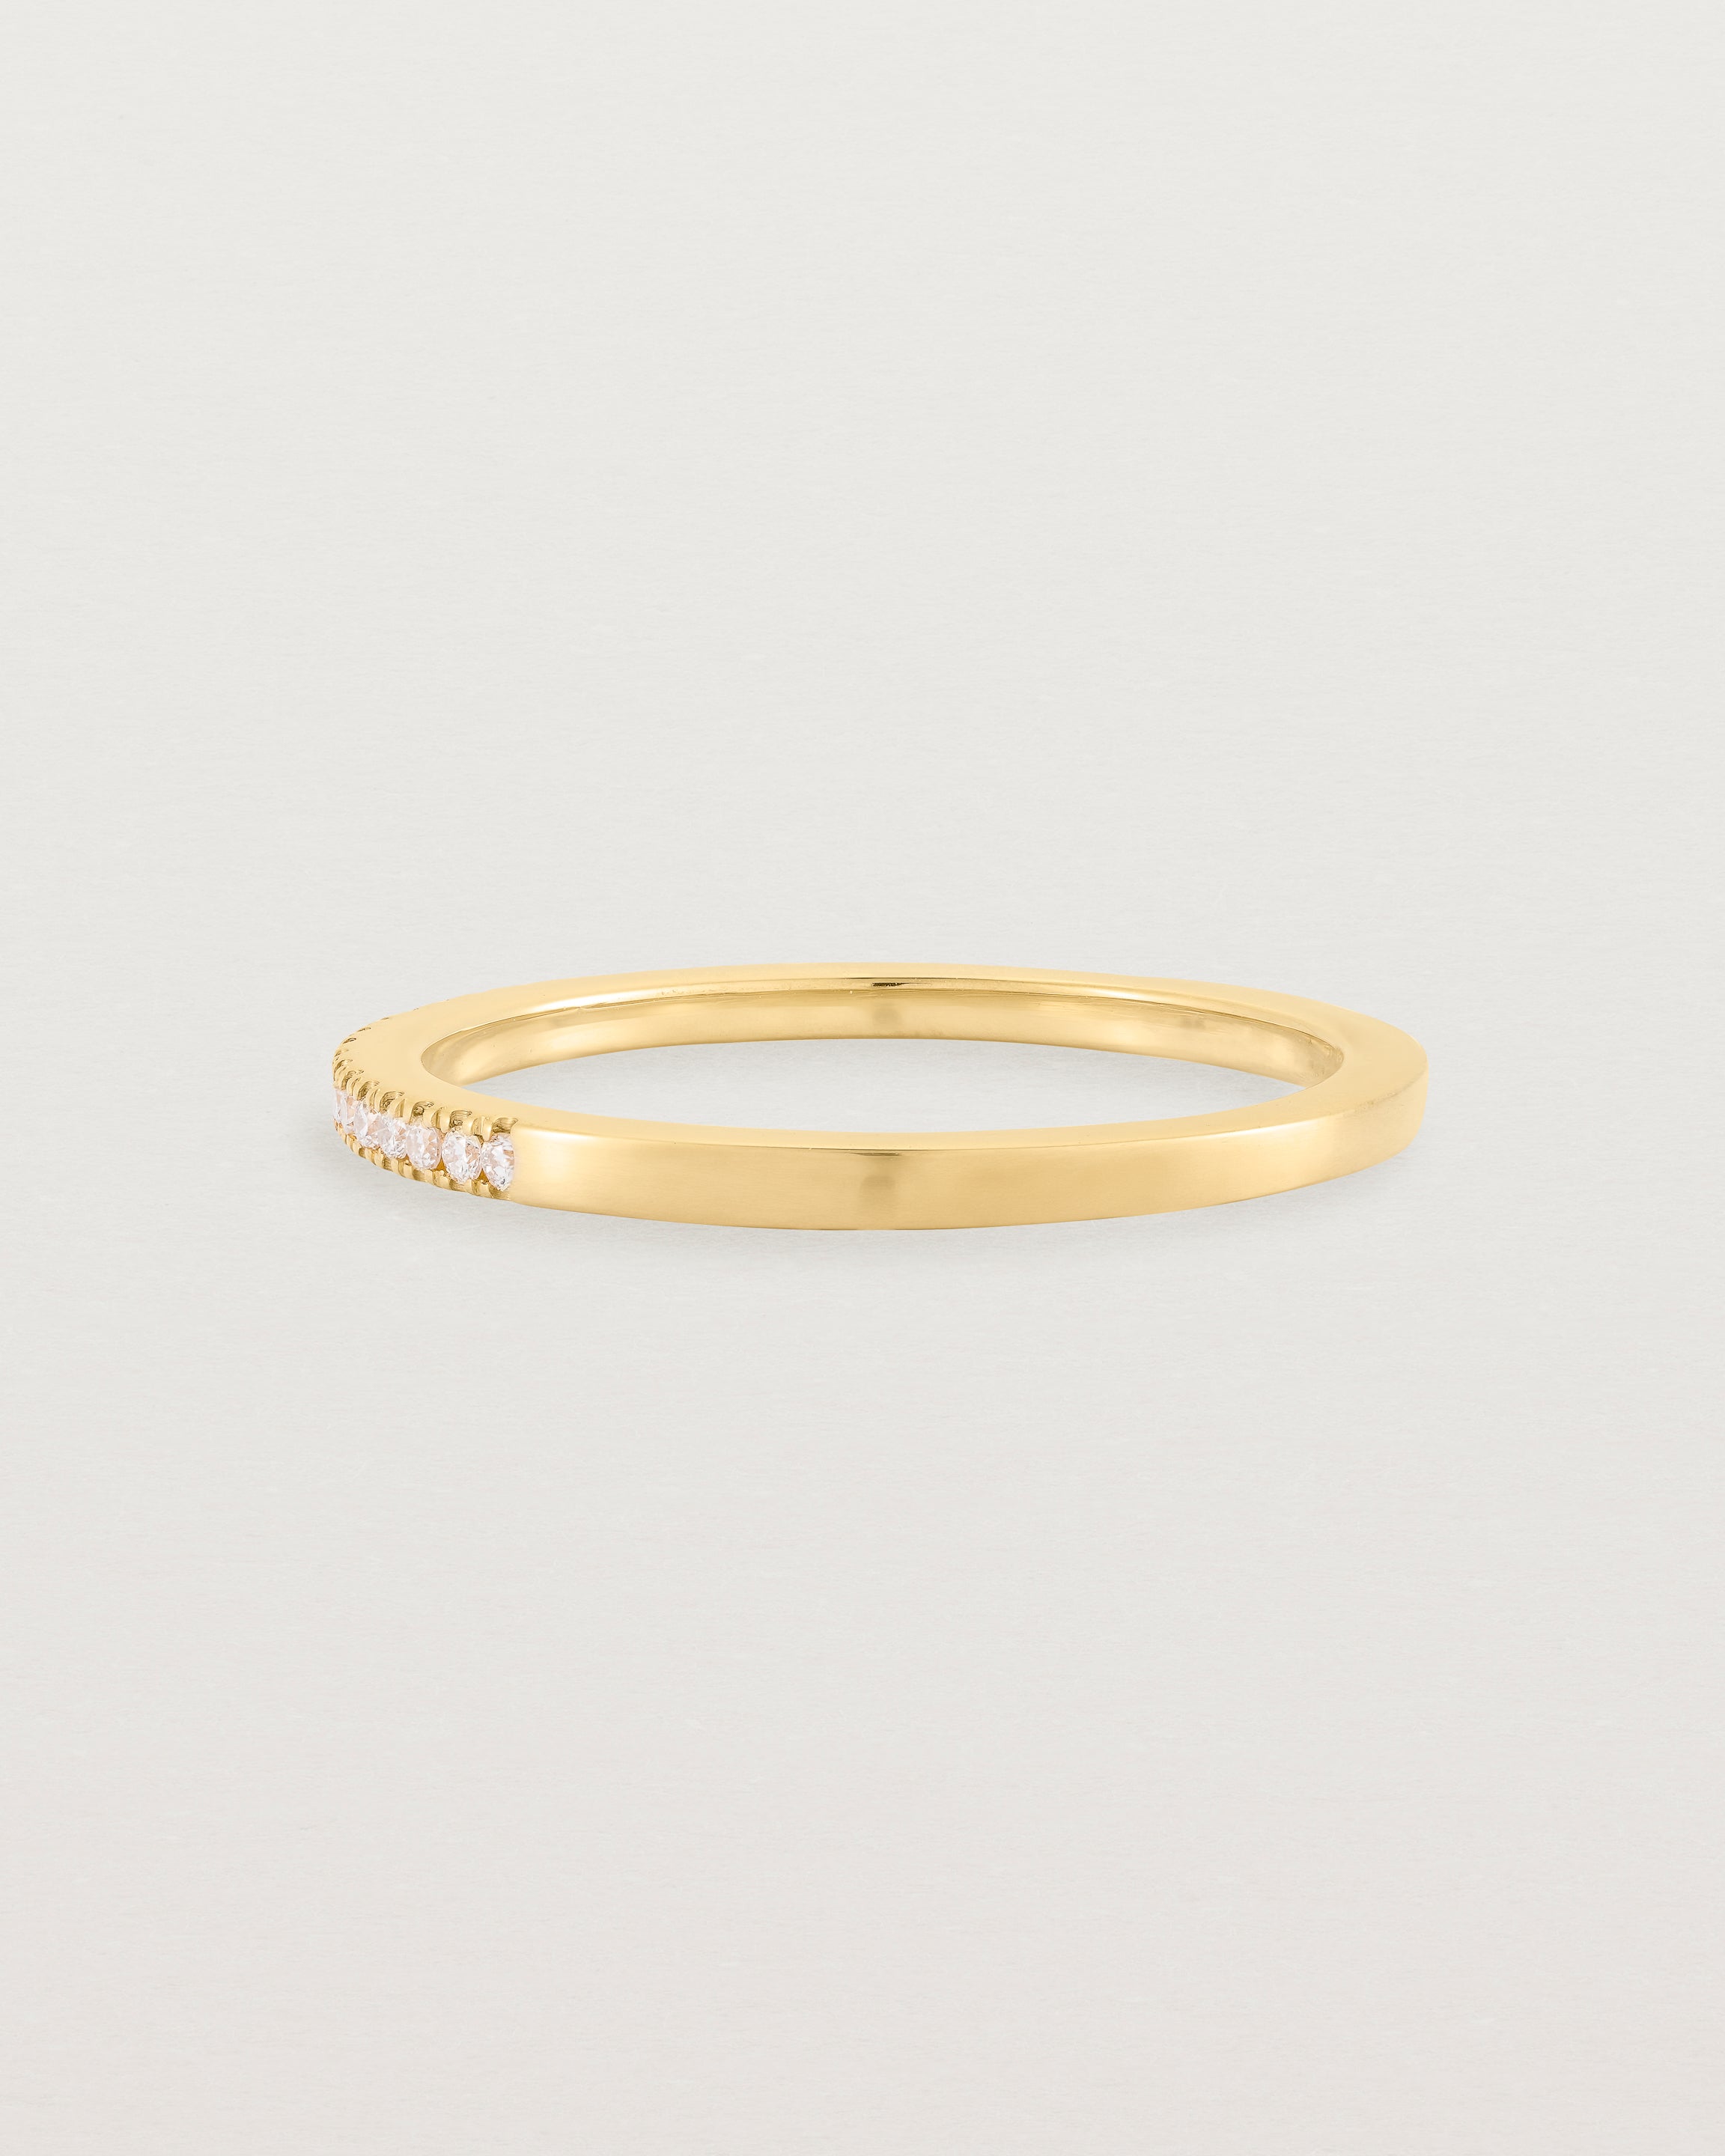 yellow gold band with half a band of micro pave diamonds